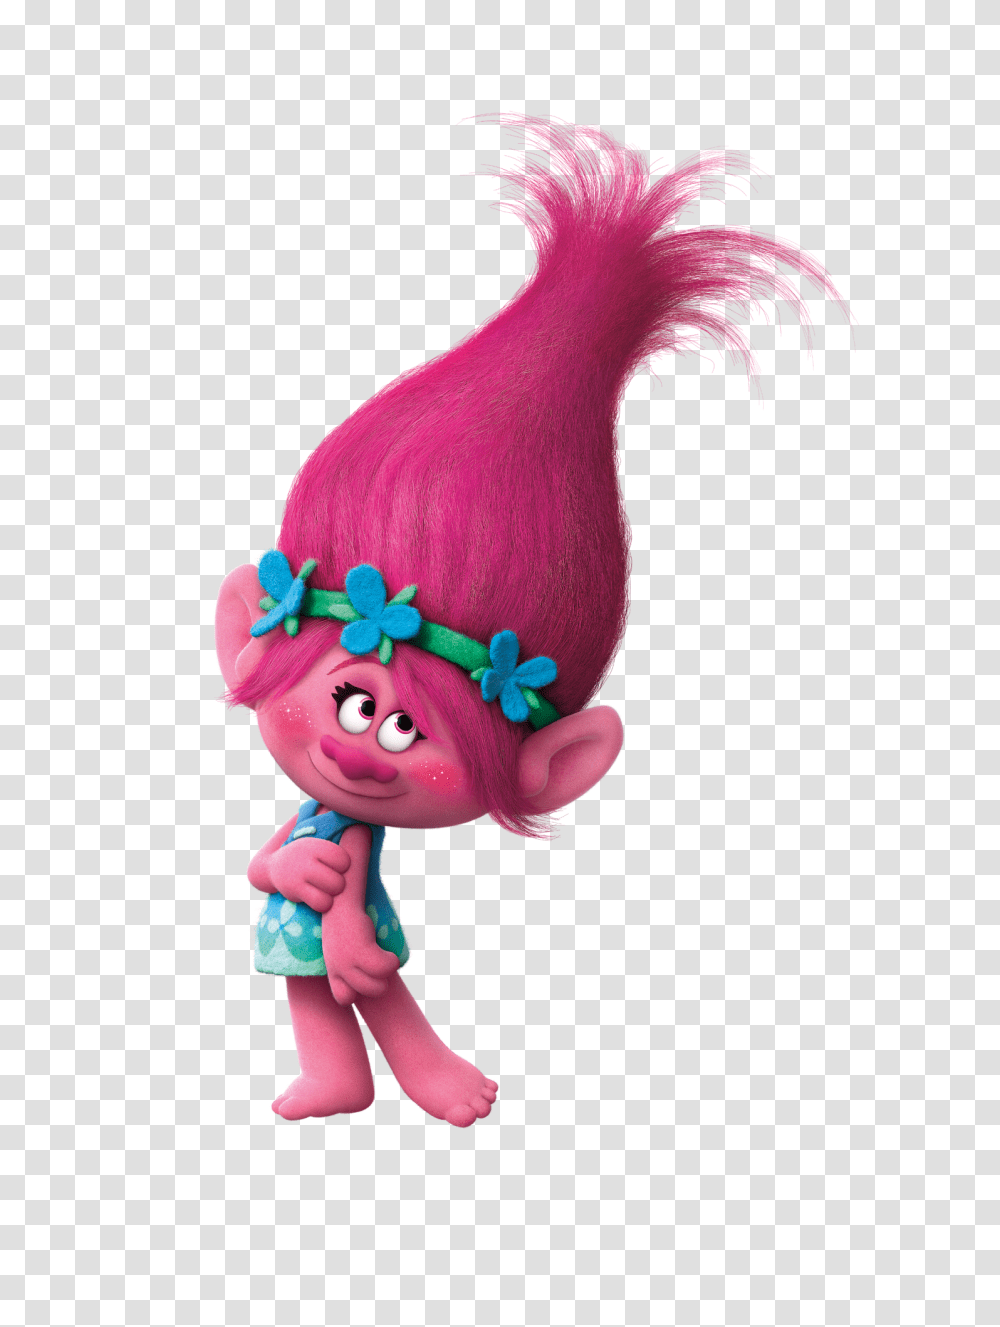 Poppygallery Trolls, Toy, Apparel, Figurine Transparent Png